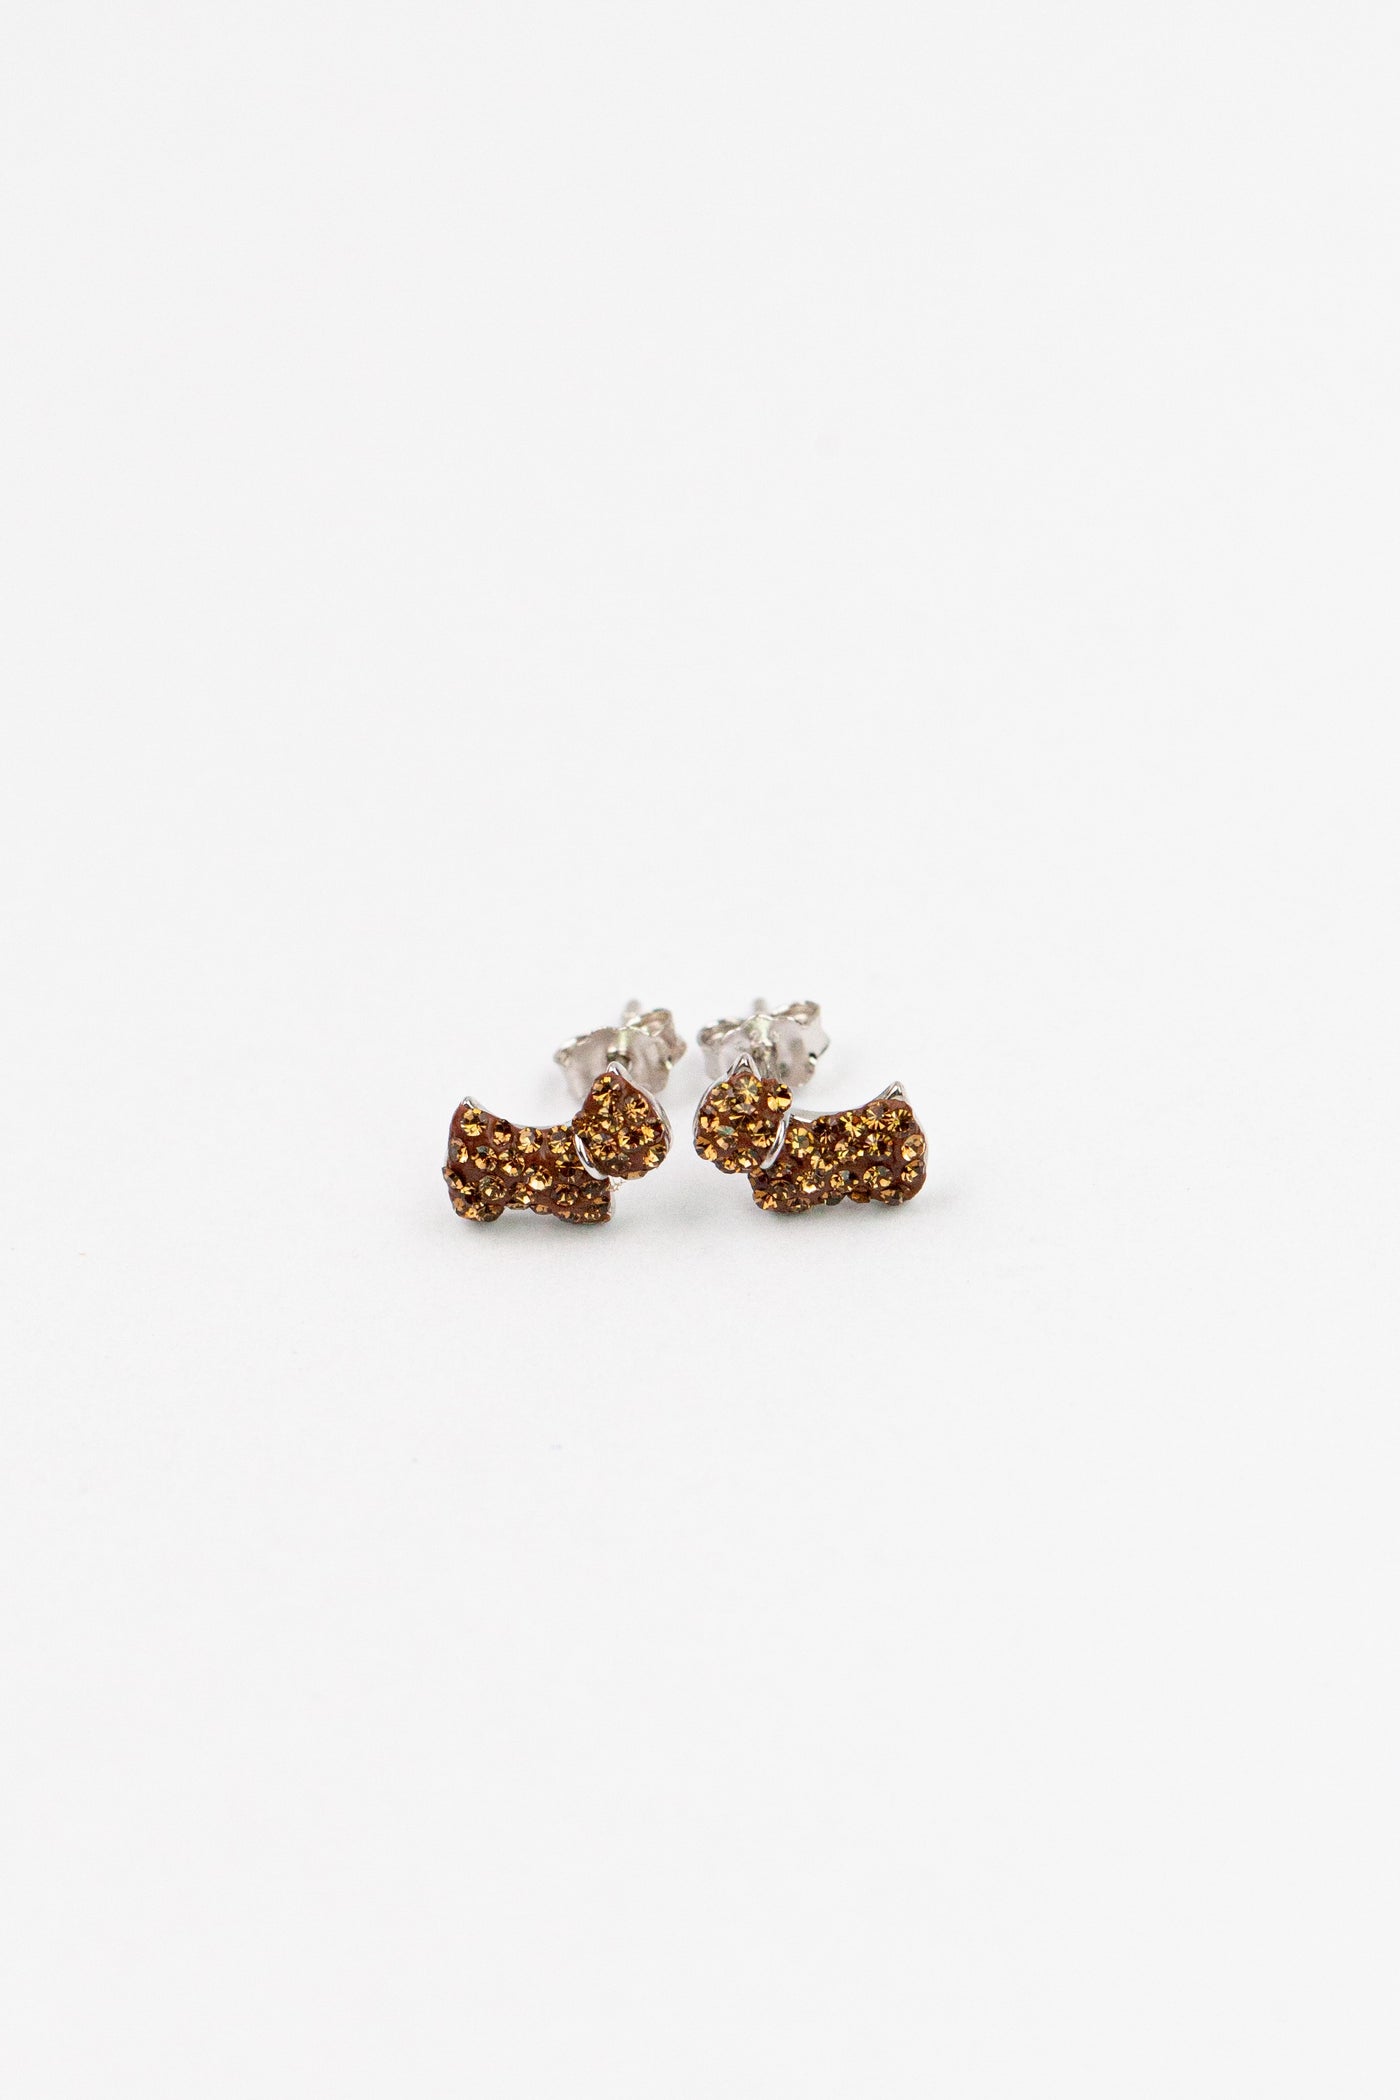 Pet Dog Crystal Pave Silver Stud Earring | Annie and Sisters | sister stud earrings, for kids, children's jewelry, kid's jewelry, best friend